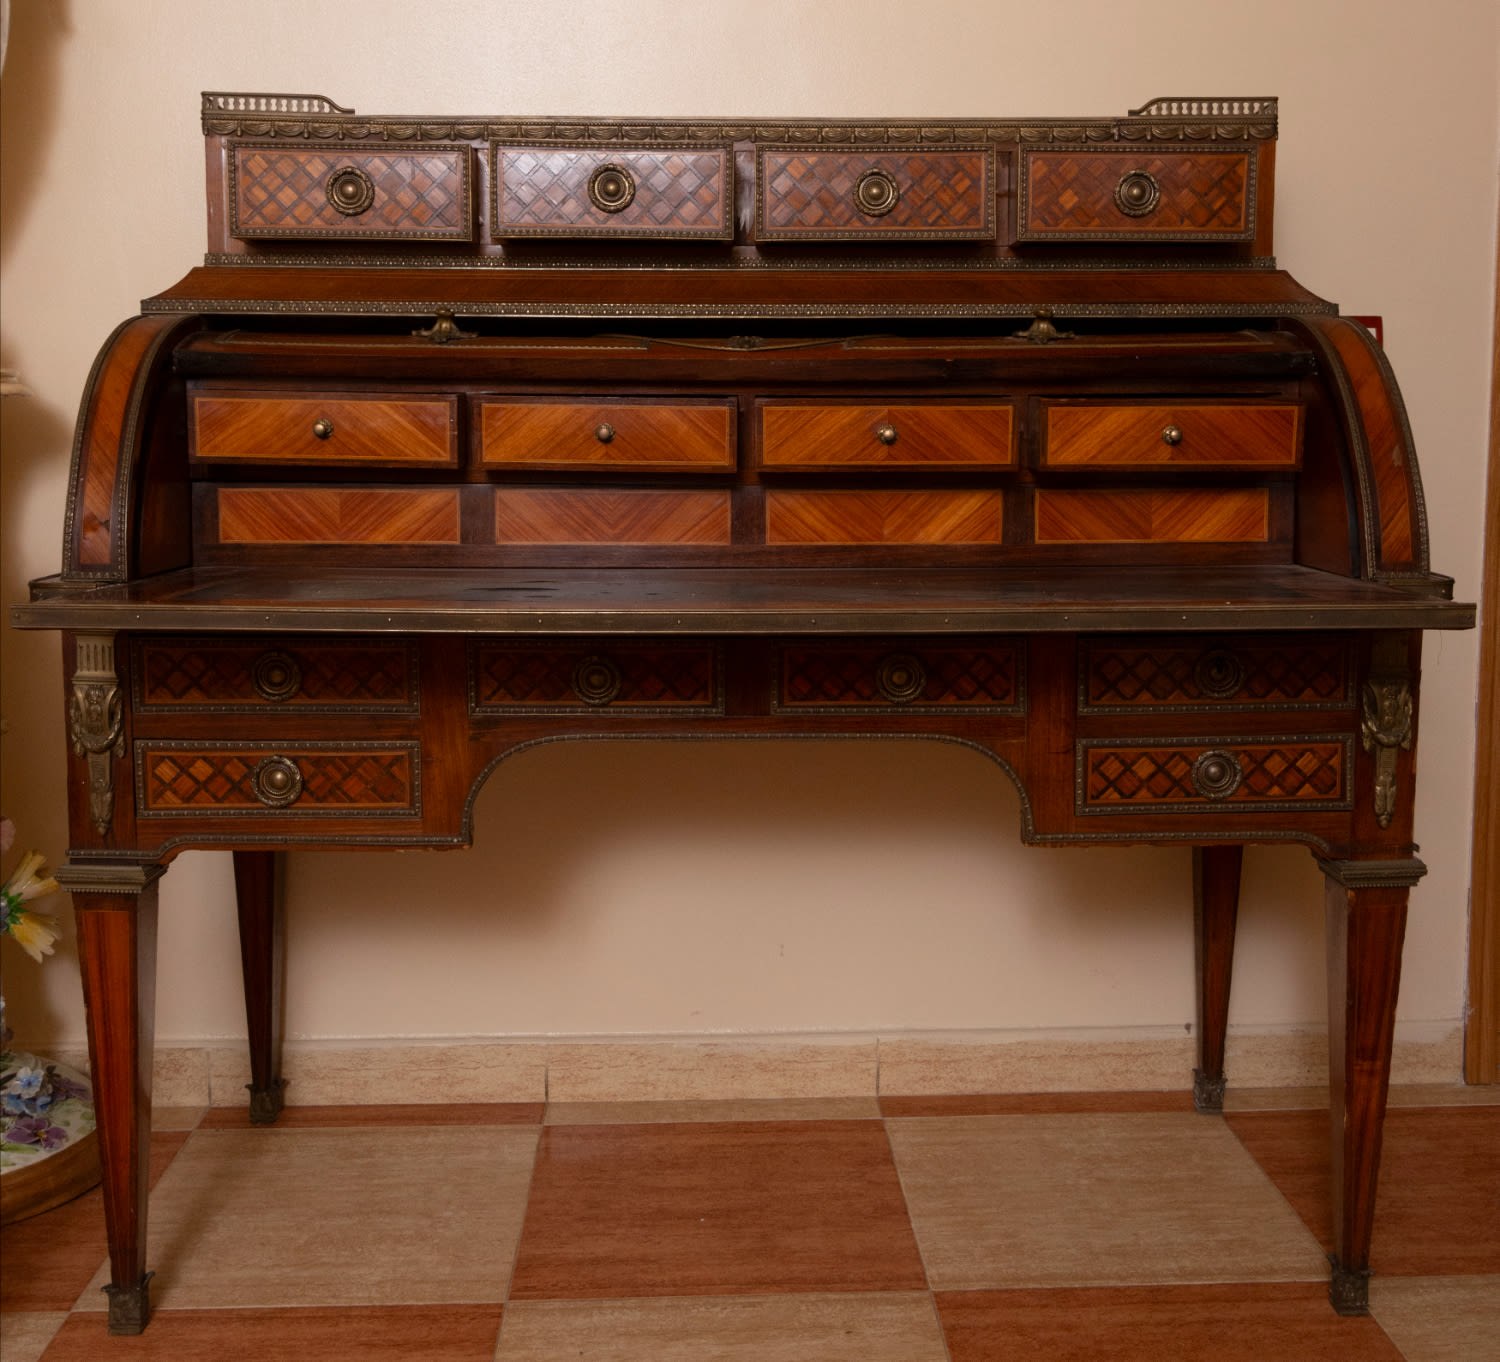 Precious "Bureau a Plat" with Bourbon shield in marquetry from the beginning of the 20th century to  - Image 4 of 6